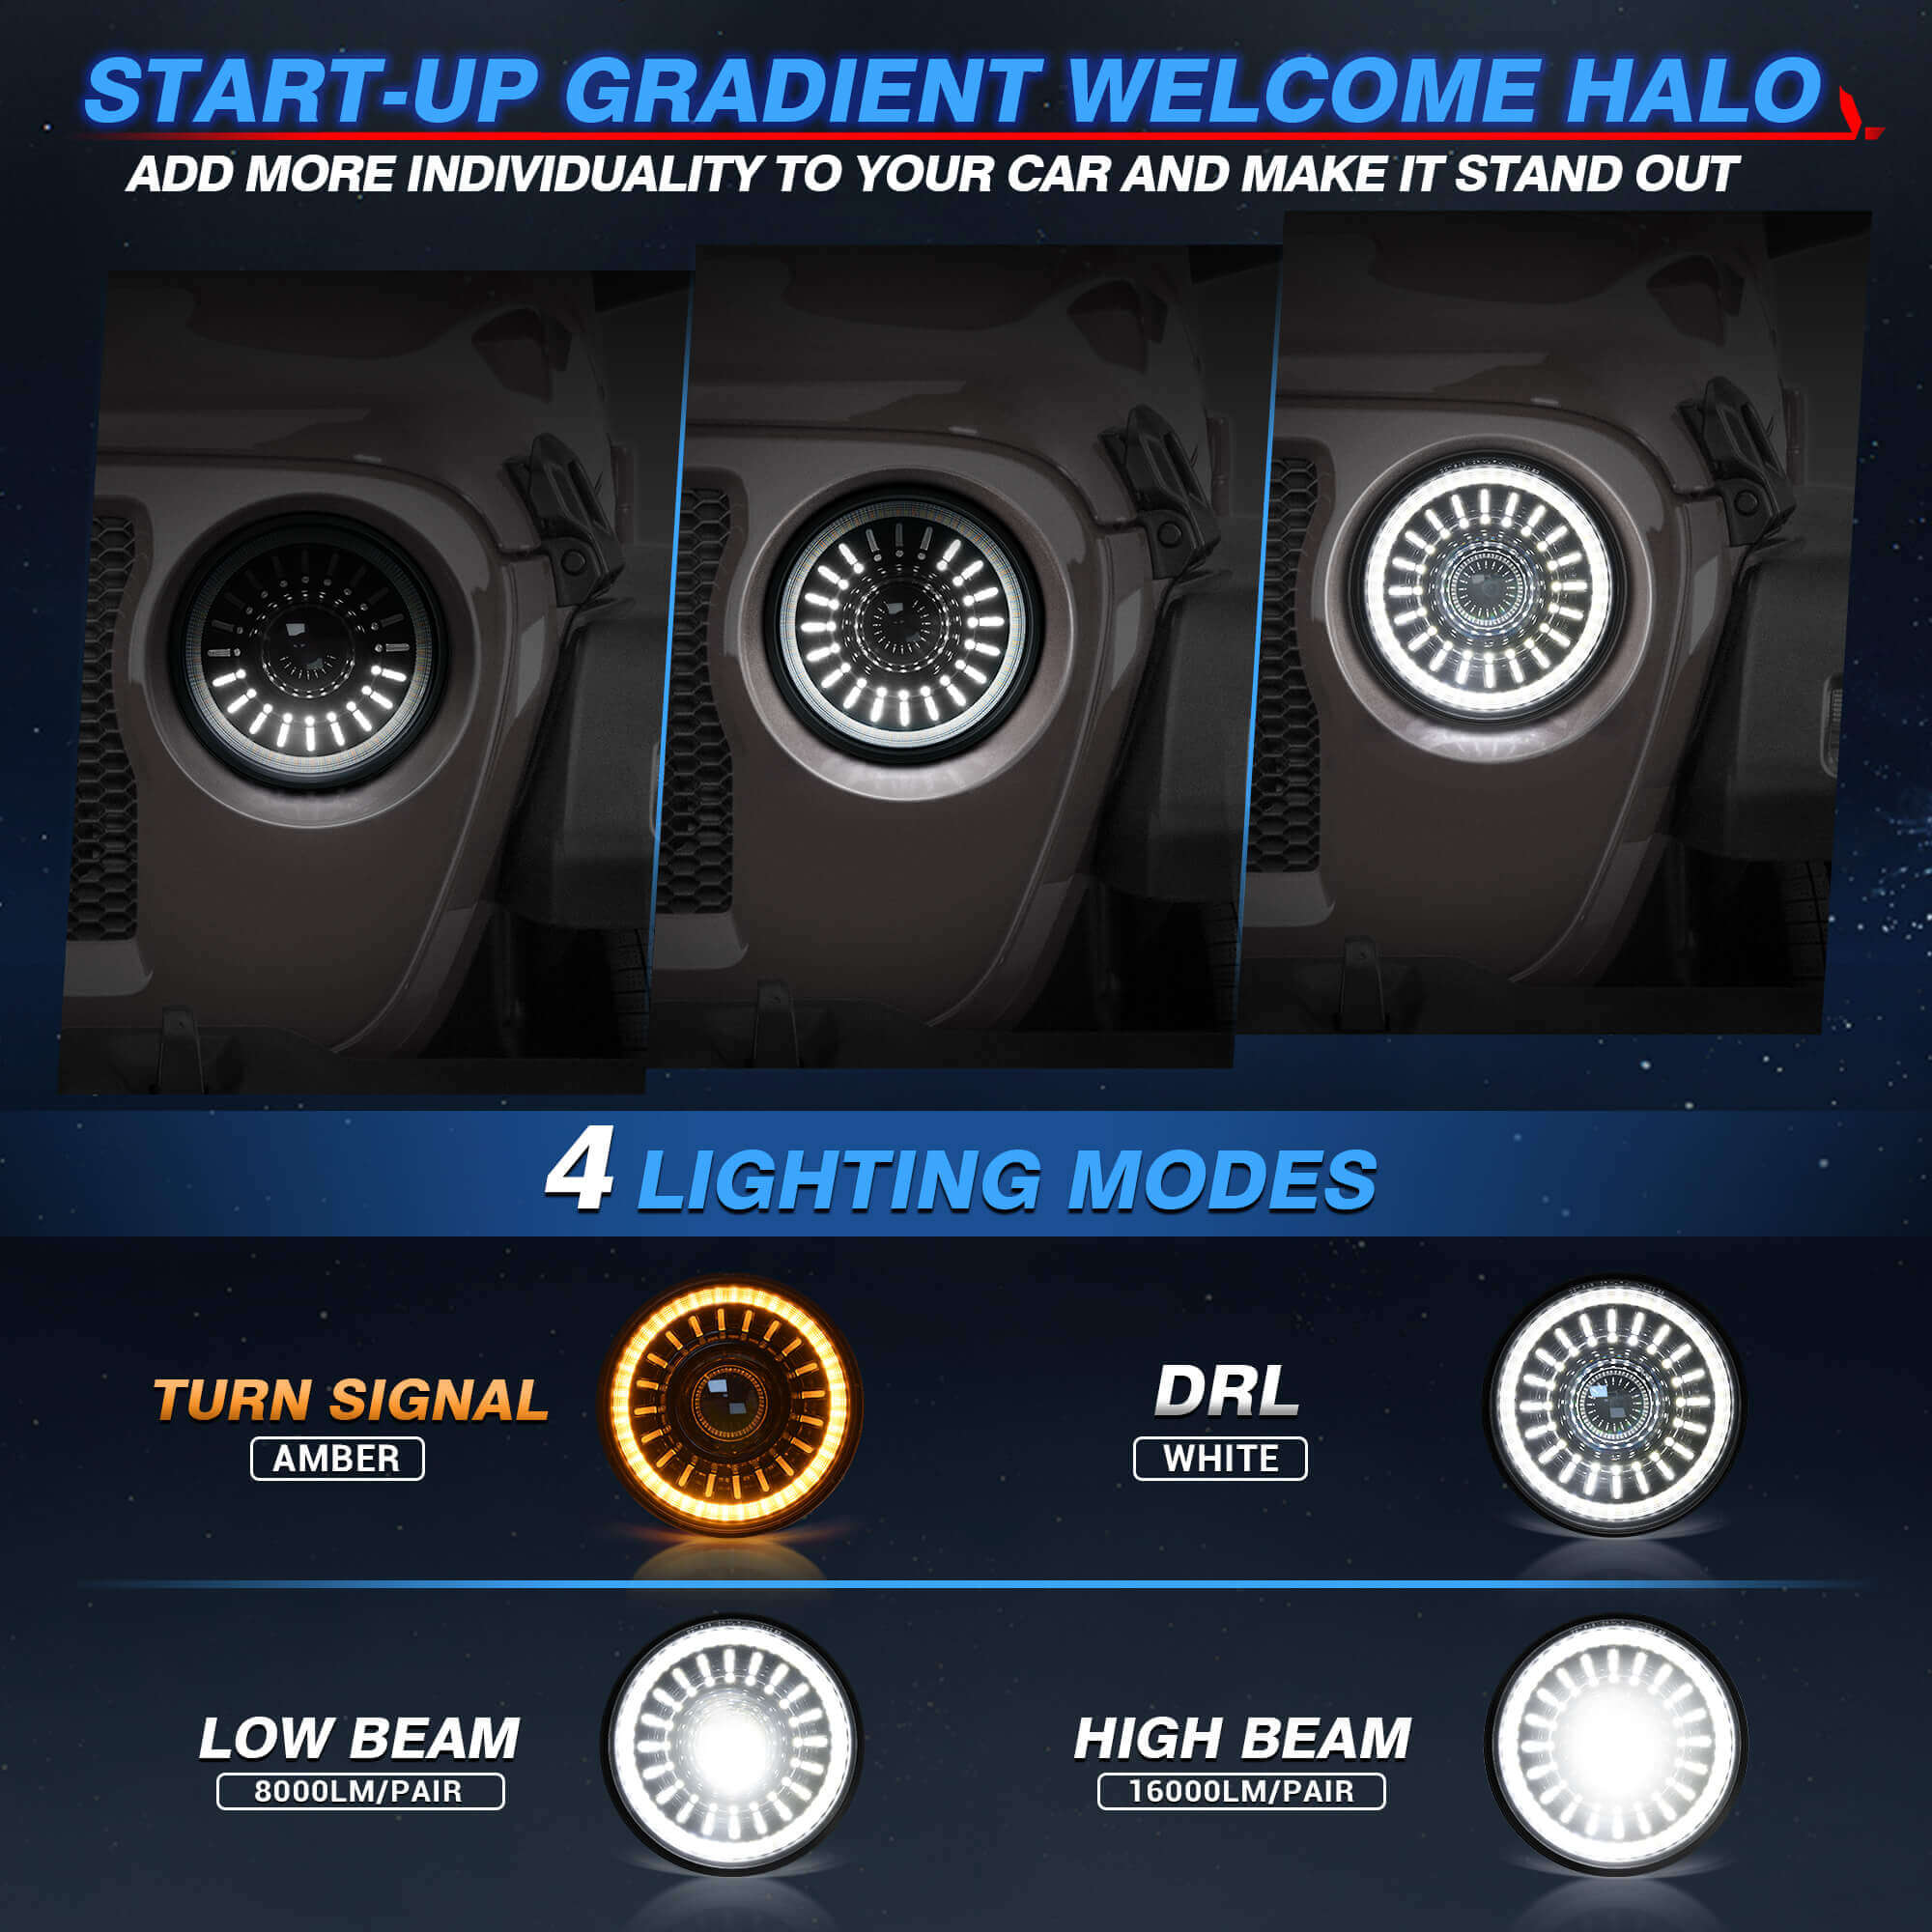 J1 Anti-Glare 7 inch LED Headlights 1000% Brighter, Dot Approved Phospherus Headlights with Start-Up Gradient Welcome Halo MICTUNING